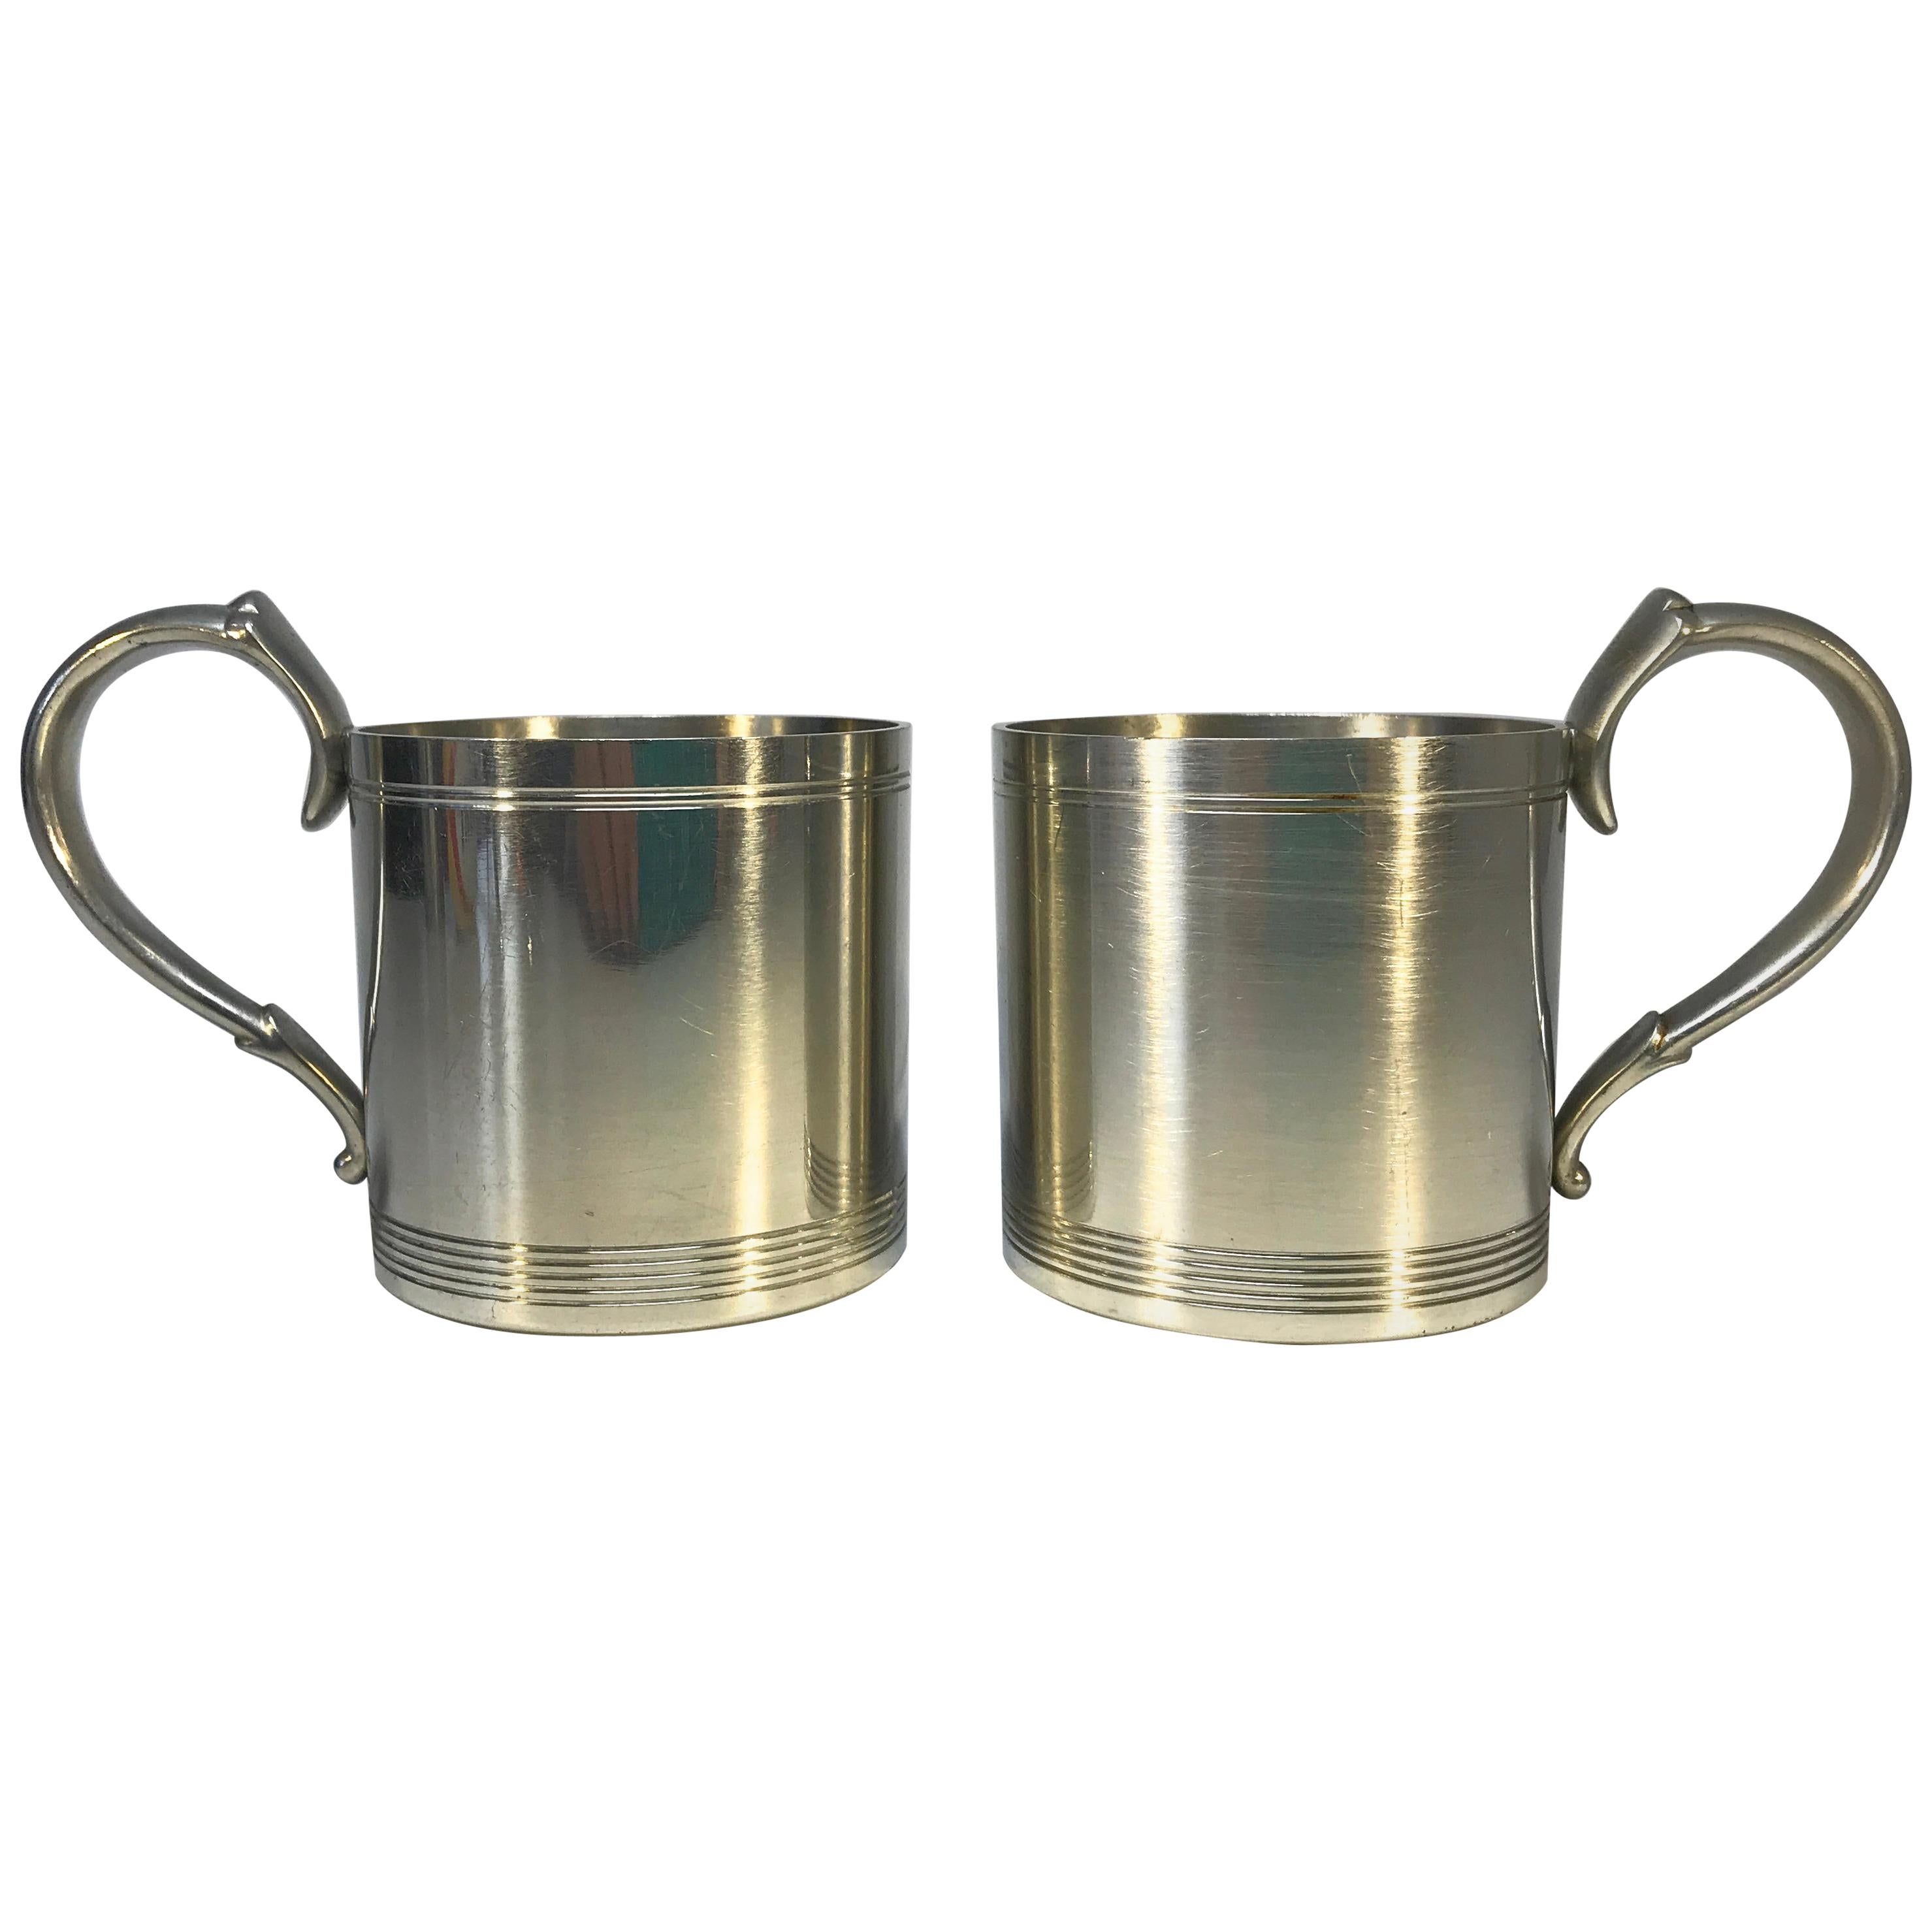 Just Andersen, Denmark, Pair Vintage Polished Pewter 1940's Hot Toddy Cups #1289